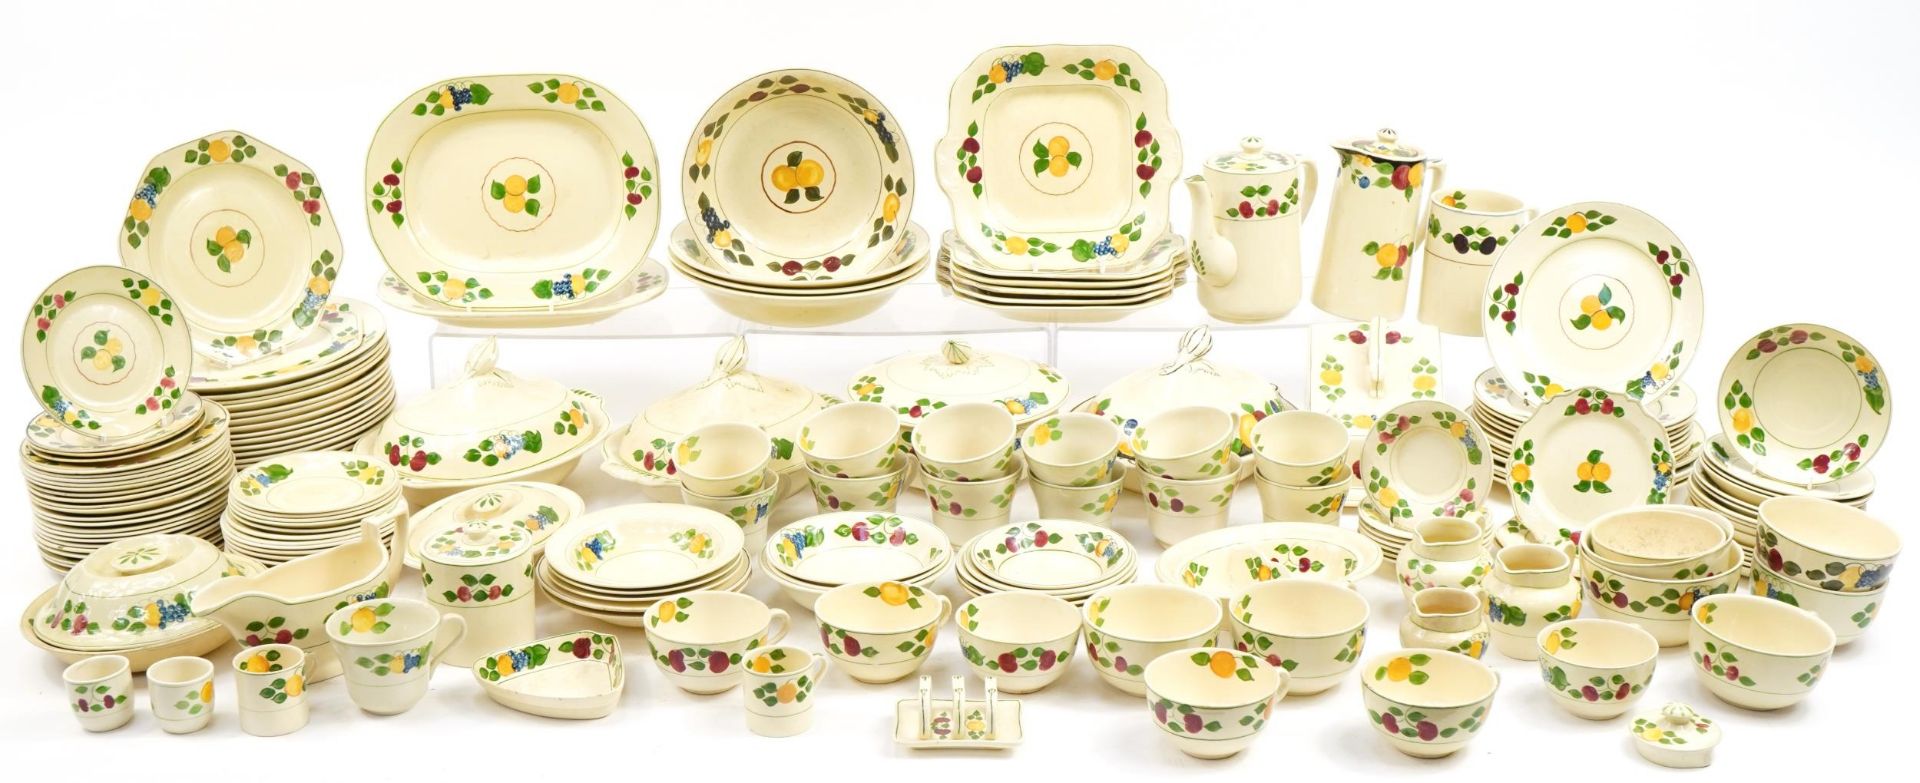 Large collection of Royal Adams Titian Ware including cups, jugs and tureens numbered 673892, the